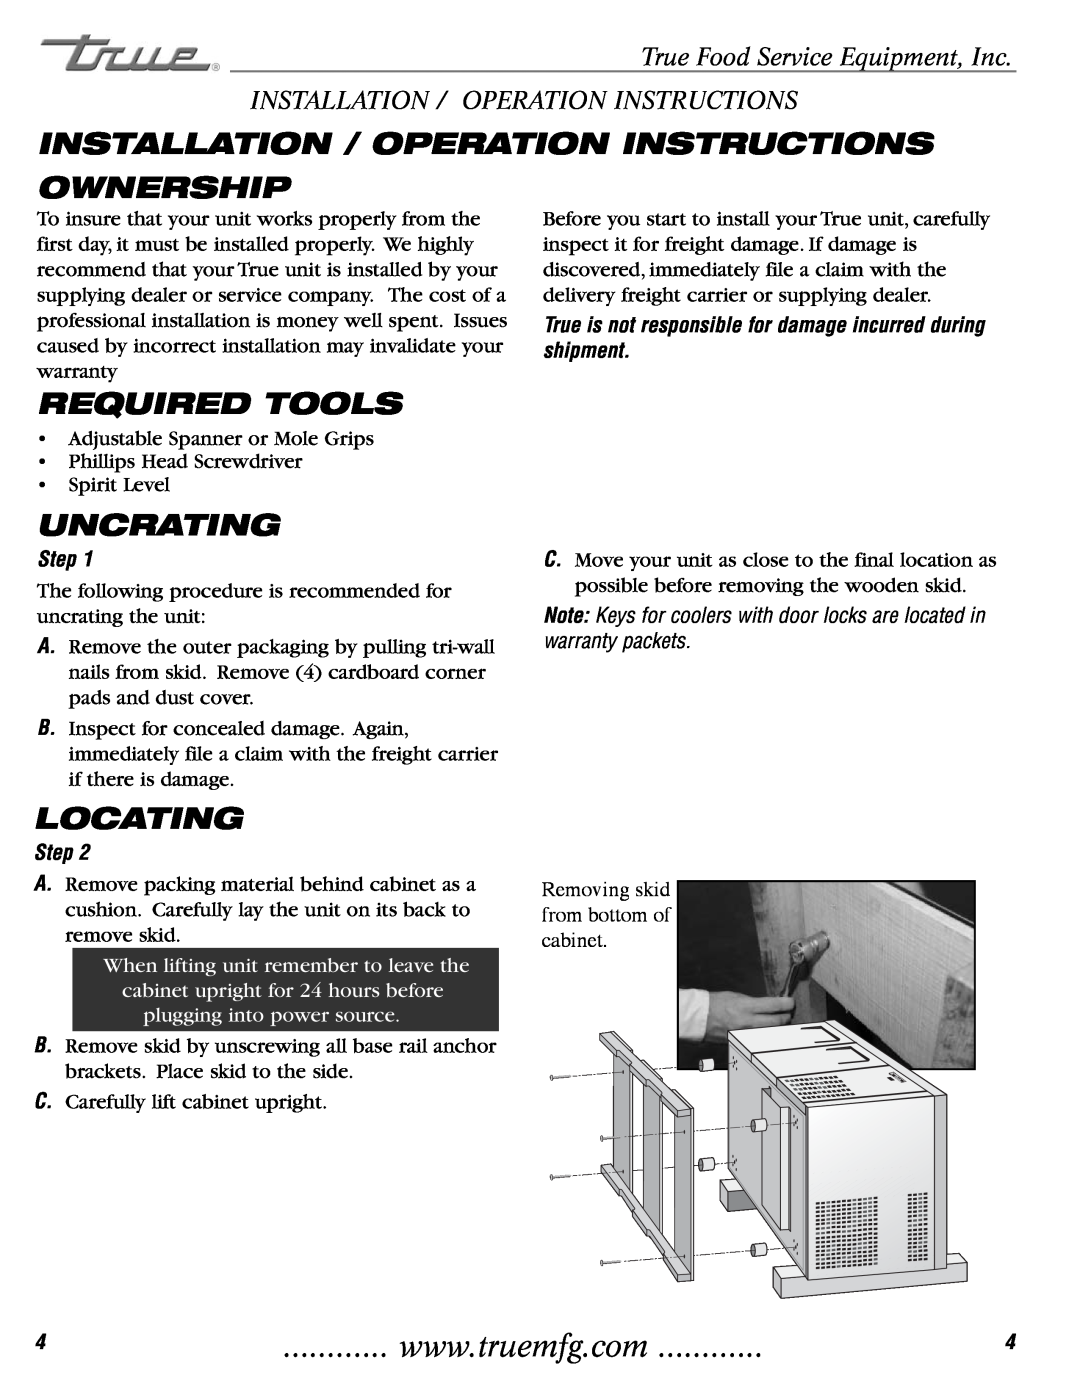 True Manufacturing Company TGU-3F Installation / Operation Instructions, Ownership, Required Tools, Uncrating, Locating 